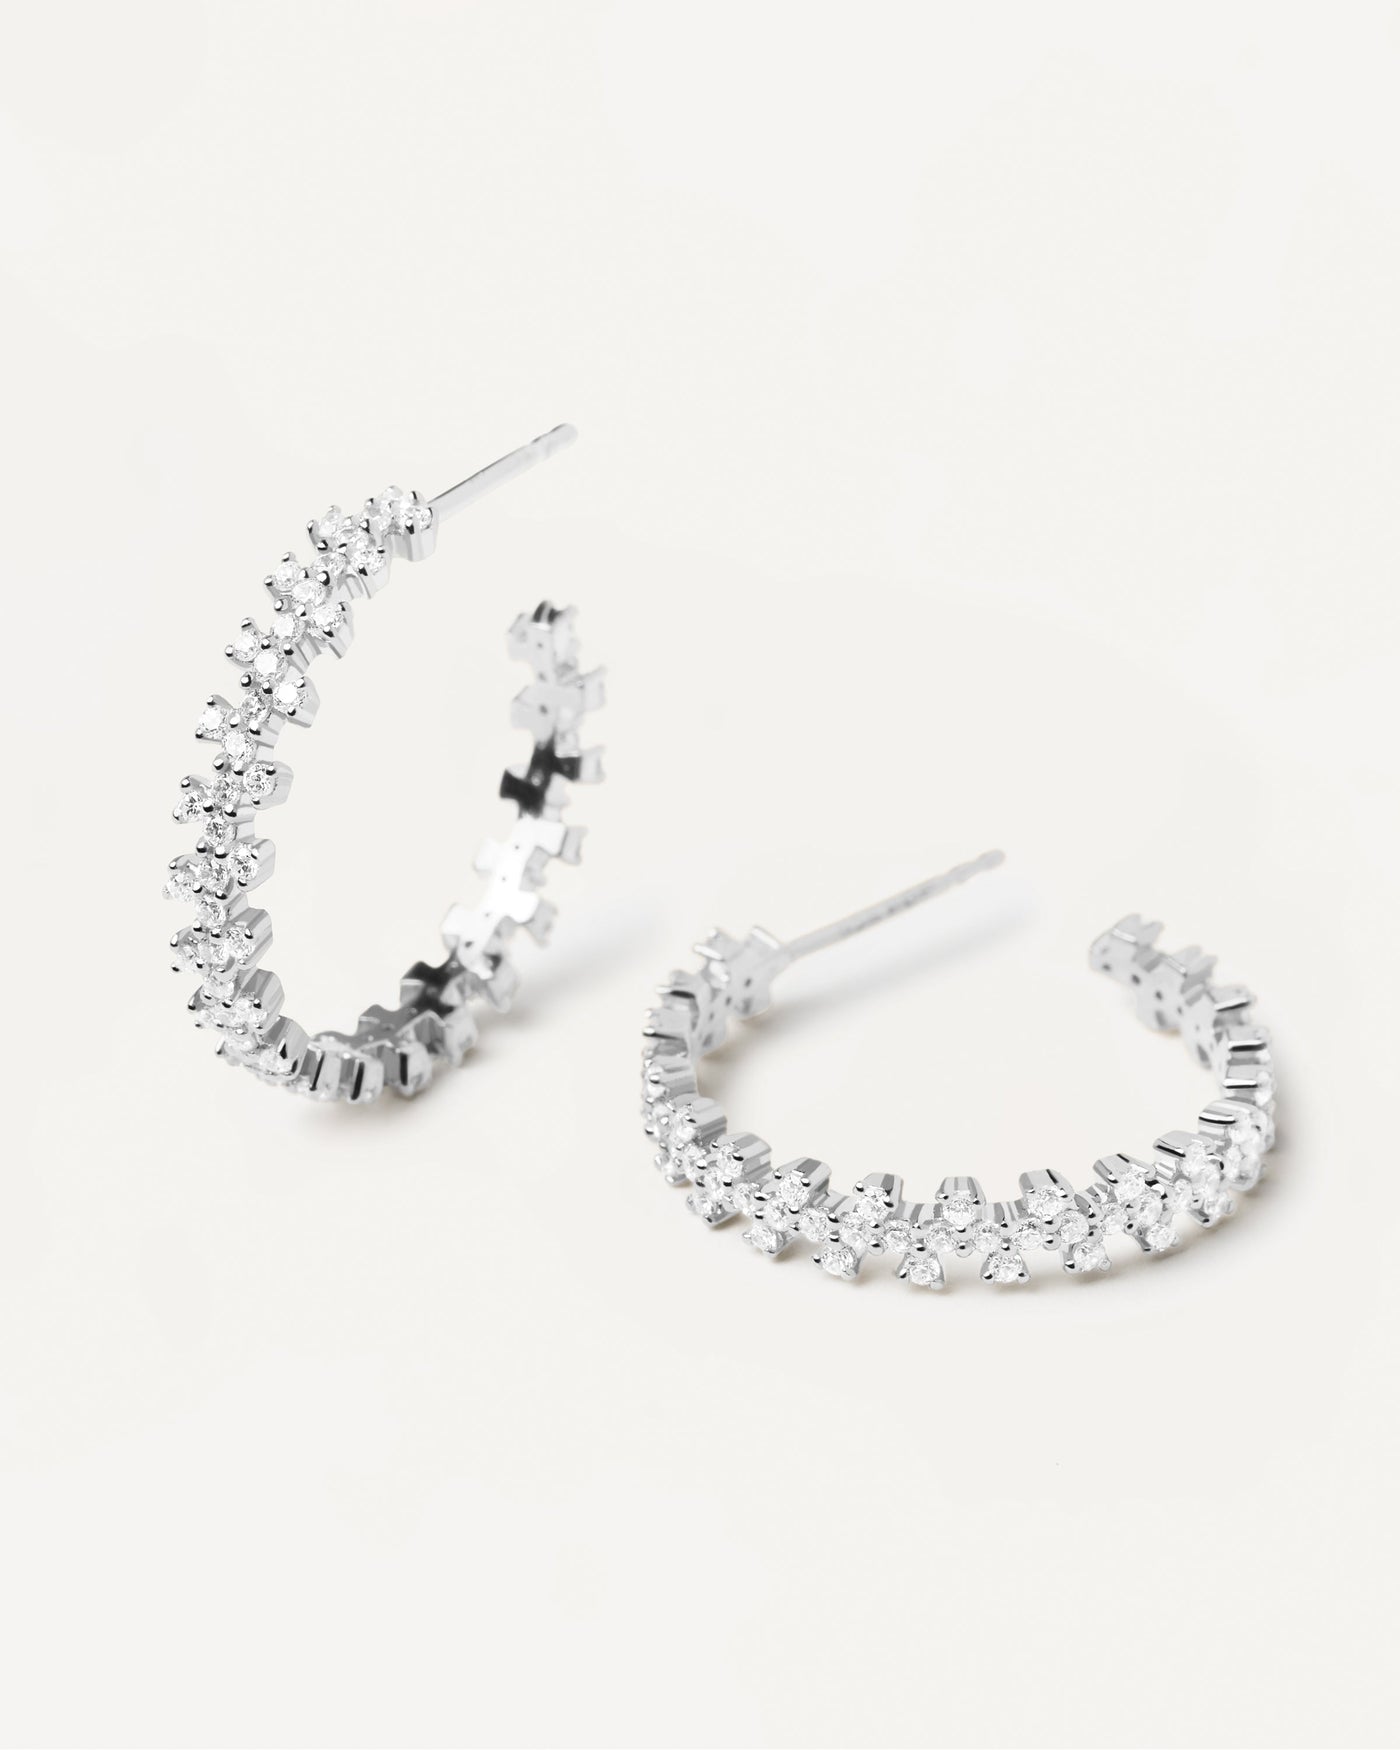 2023 Selection | Crown Silver Earrings. Silver hoop earrings with white zirconia. Get the latest arrival from PDPAOLA. Place your order safely and get this Best Seller. Free Shipping.